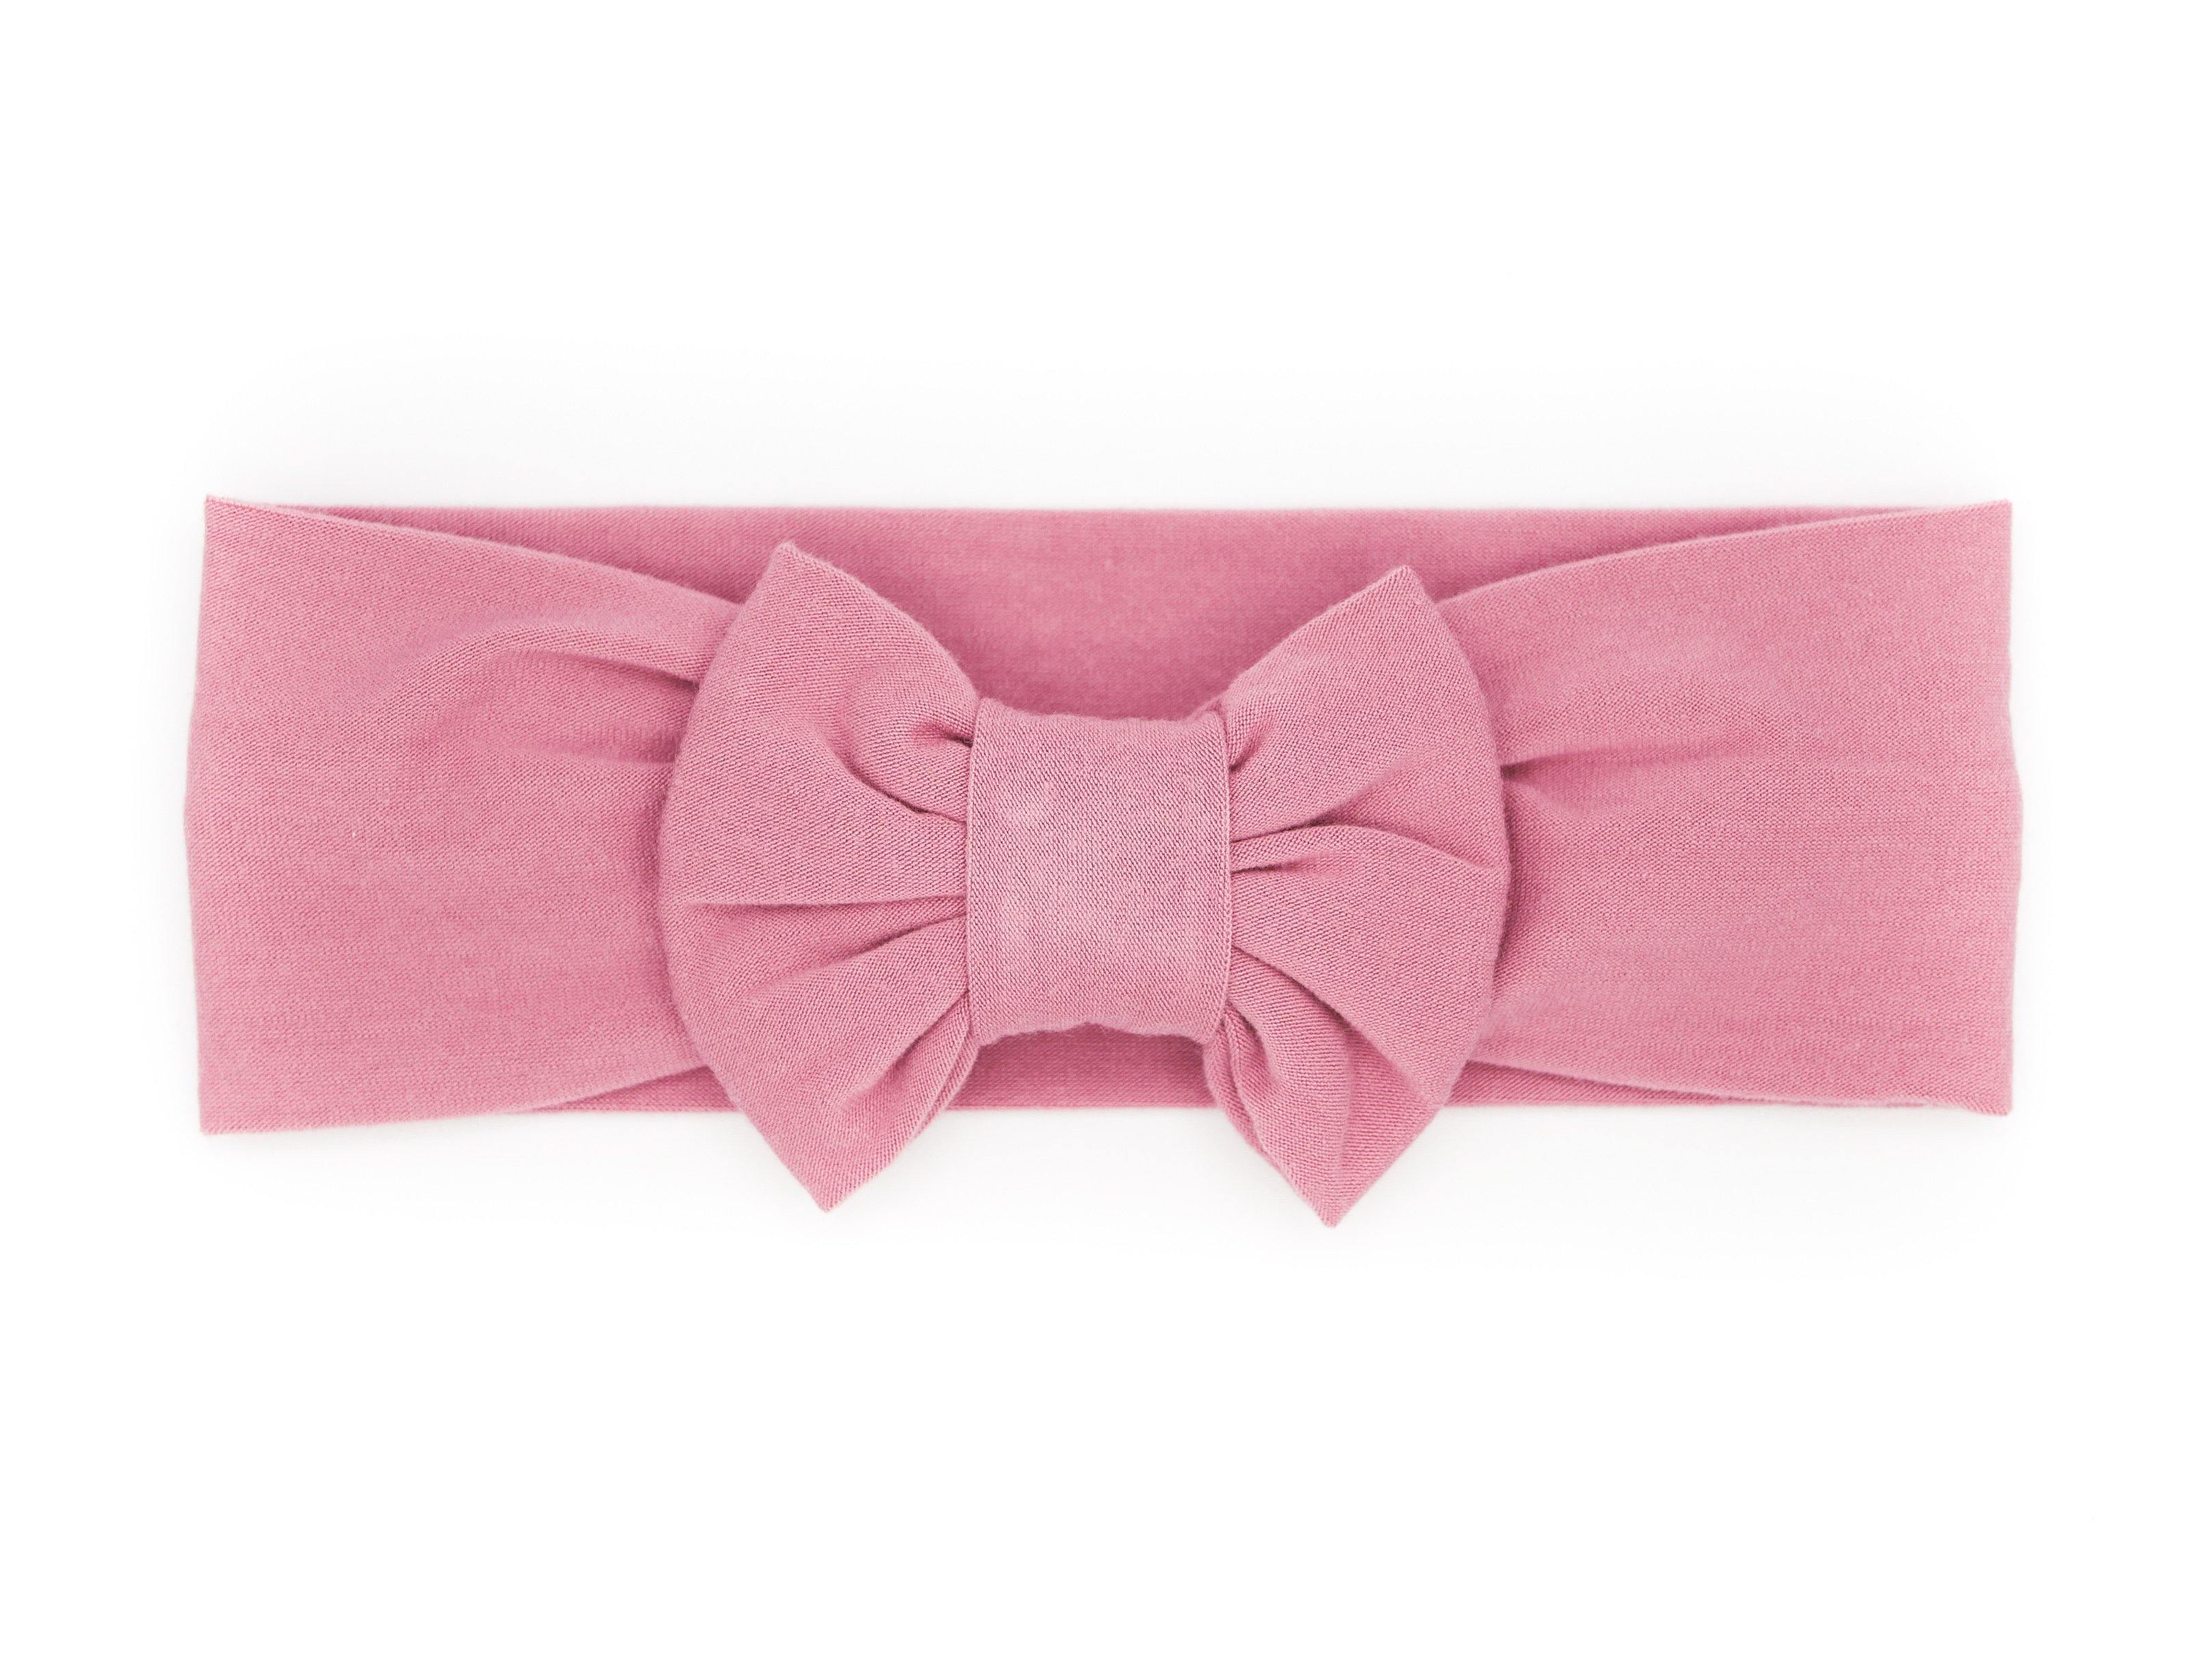 A handmade pink bow headband for little girls from By Bella Boutique.